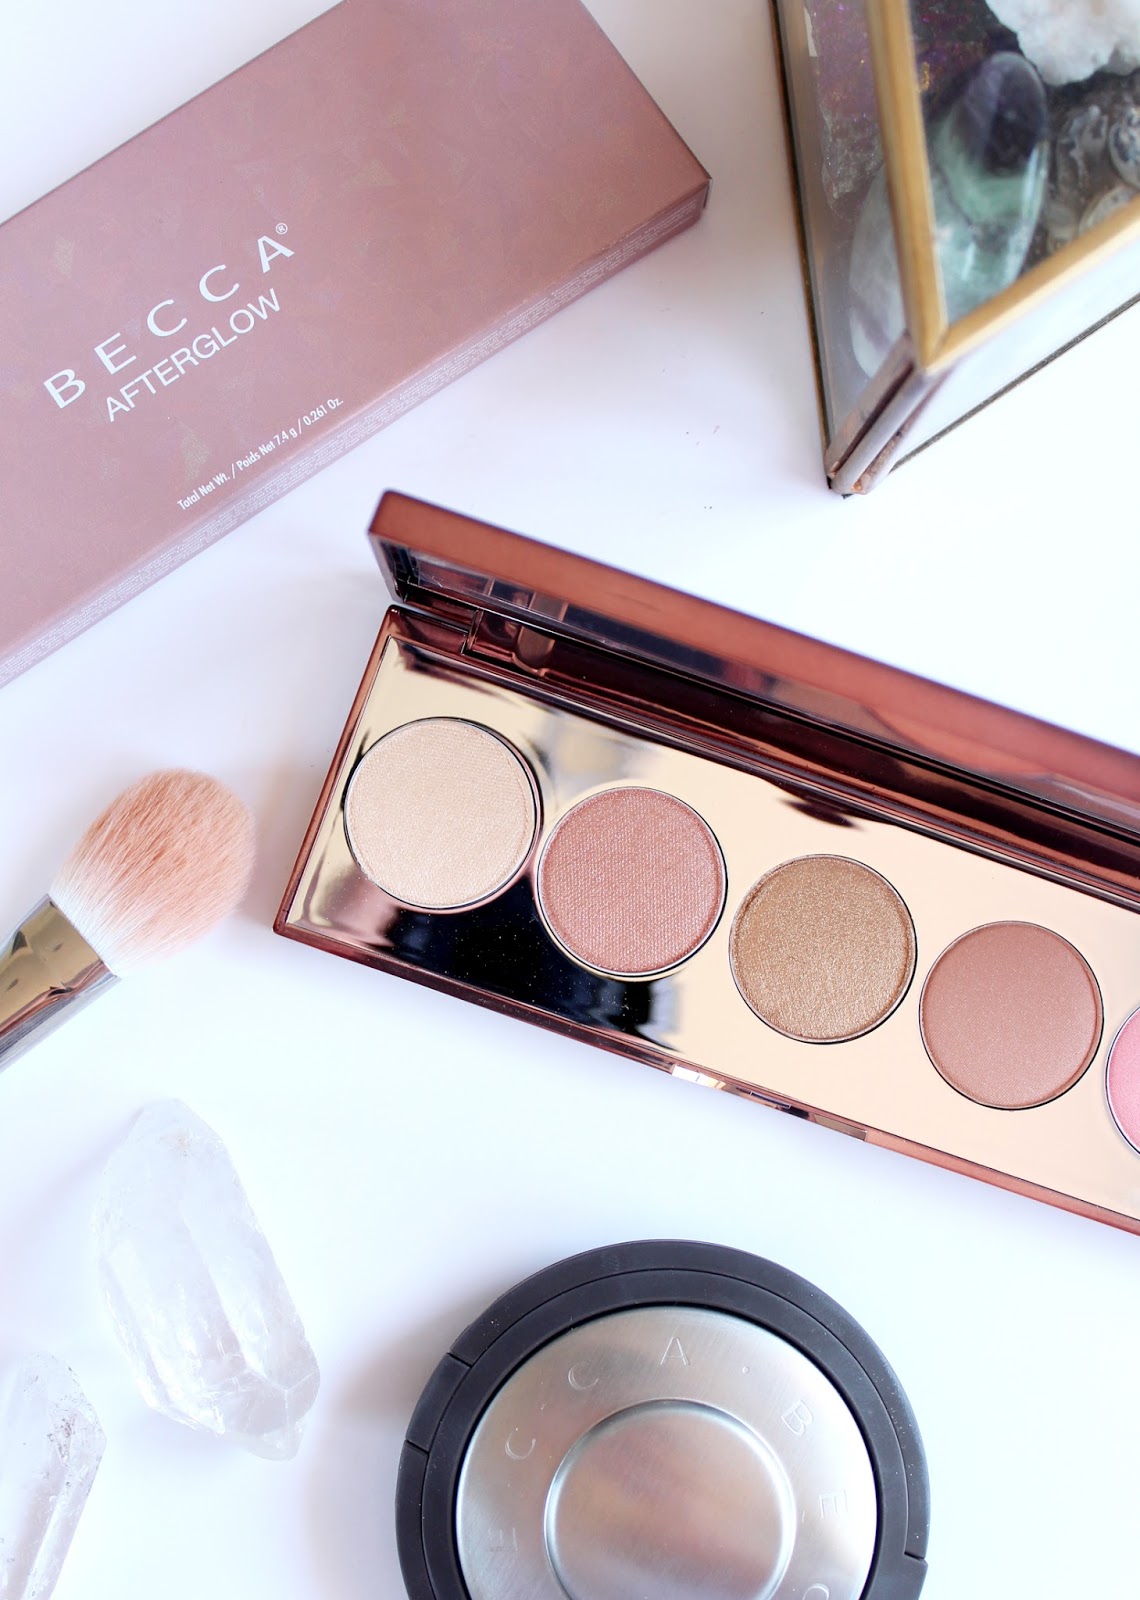 BECCA COSMETICS | Afterglow Palette - Review + Swatches - CassandraMyee